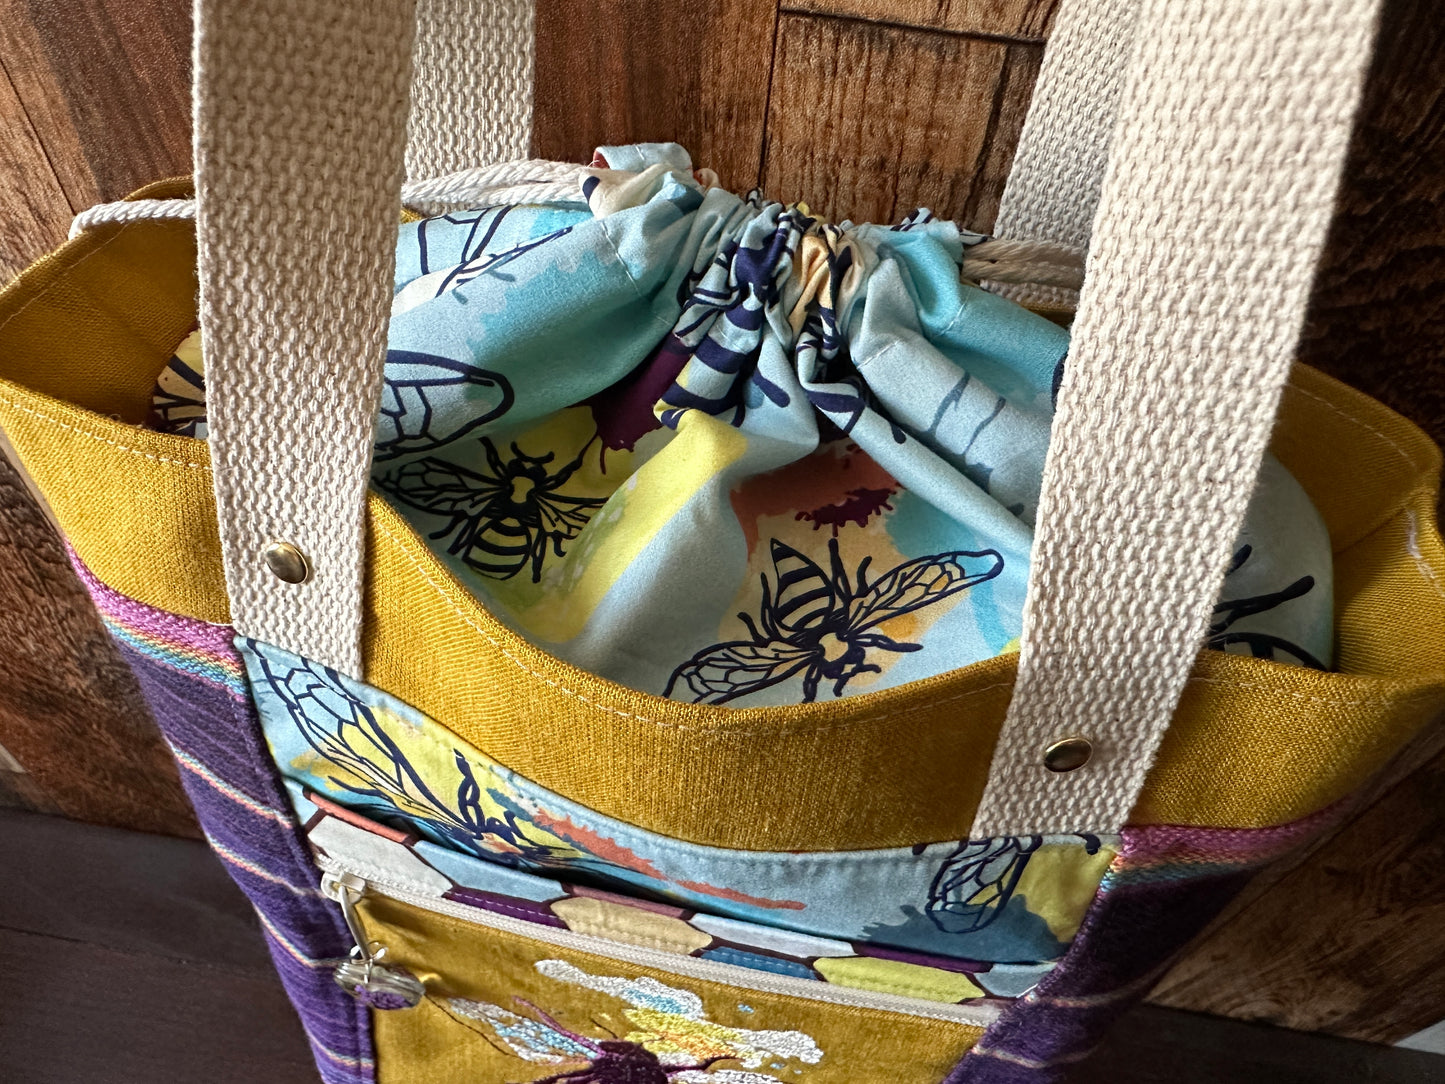 Buzzy Bees Medium Firefly Project Bag